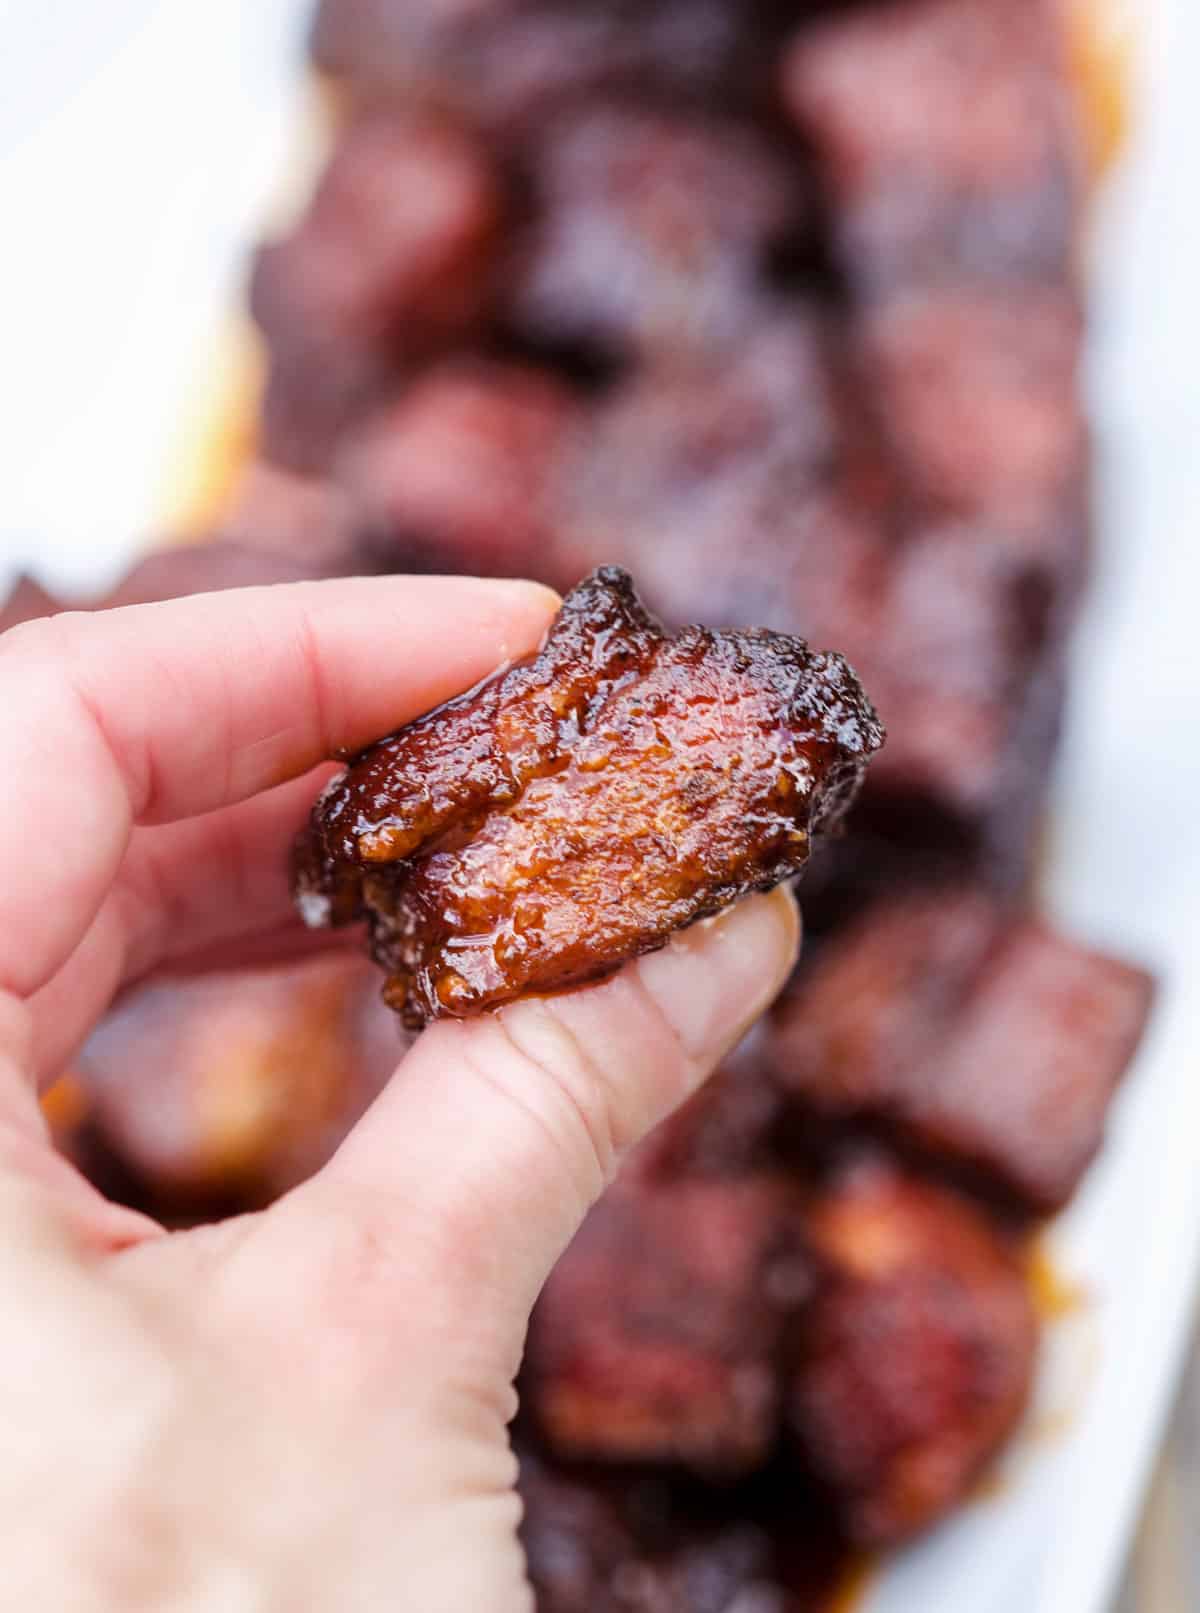 Smoked Pork Belly - Smoked BBQ Source